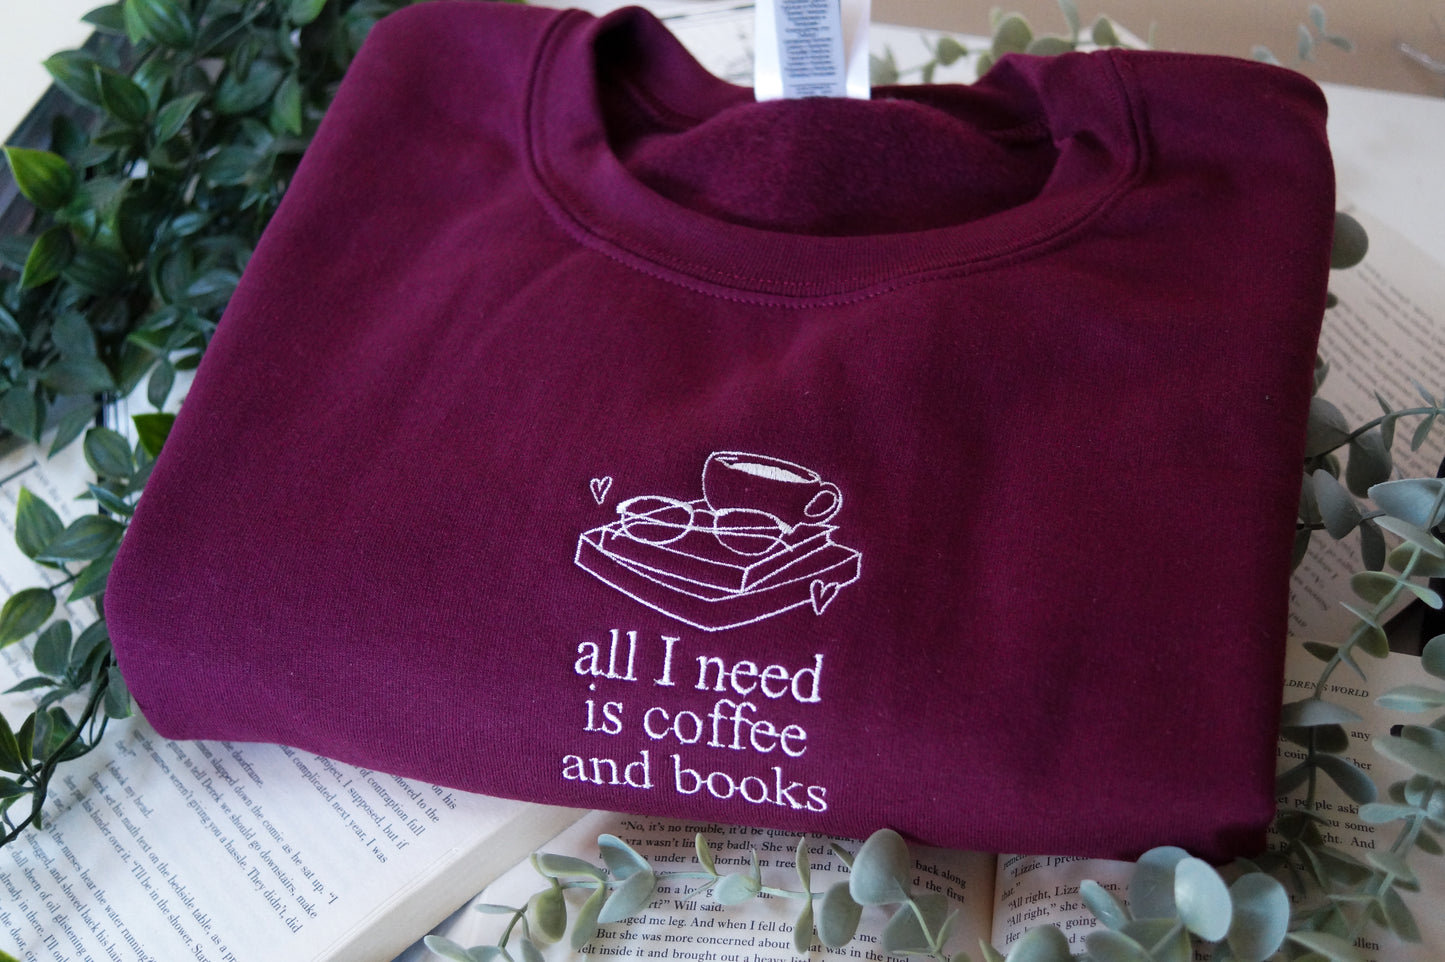 All I Need is Coffee and Books